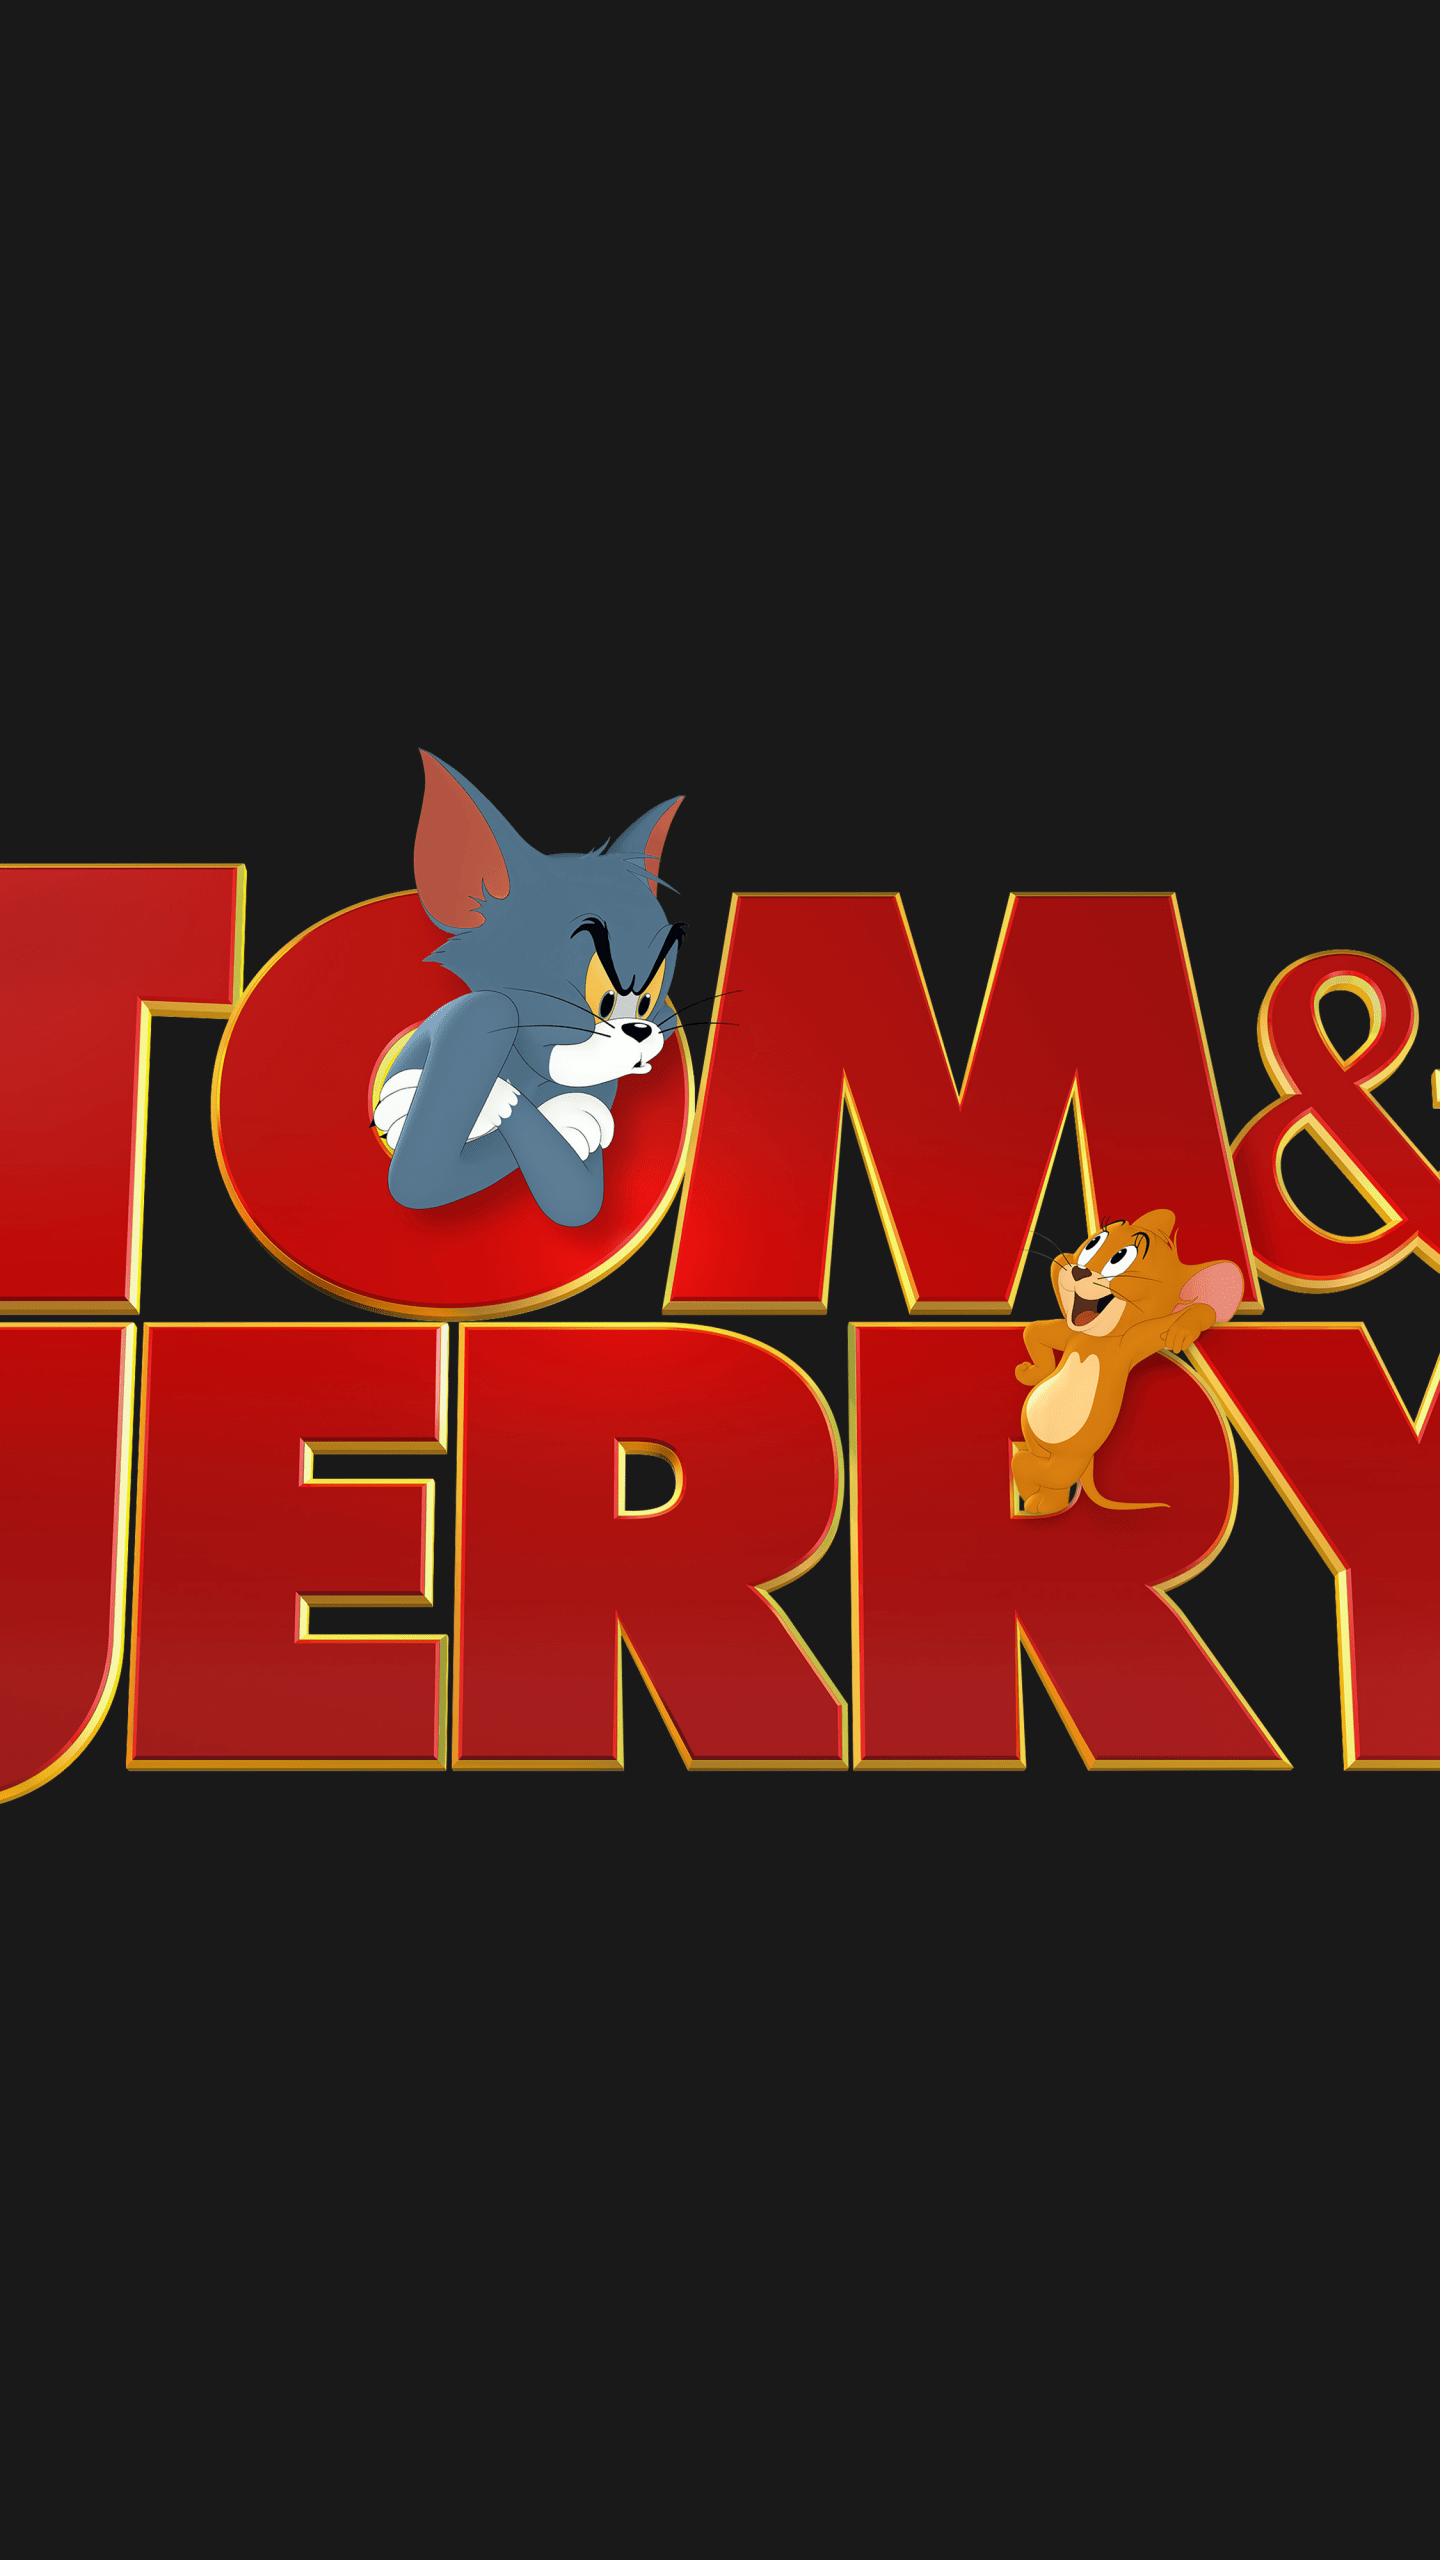 Tom and Jerry wallpaper for iPhone and Android devices - Tom and Jerry